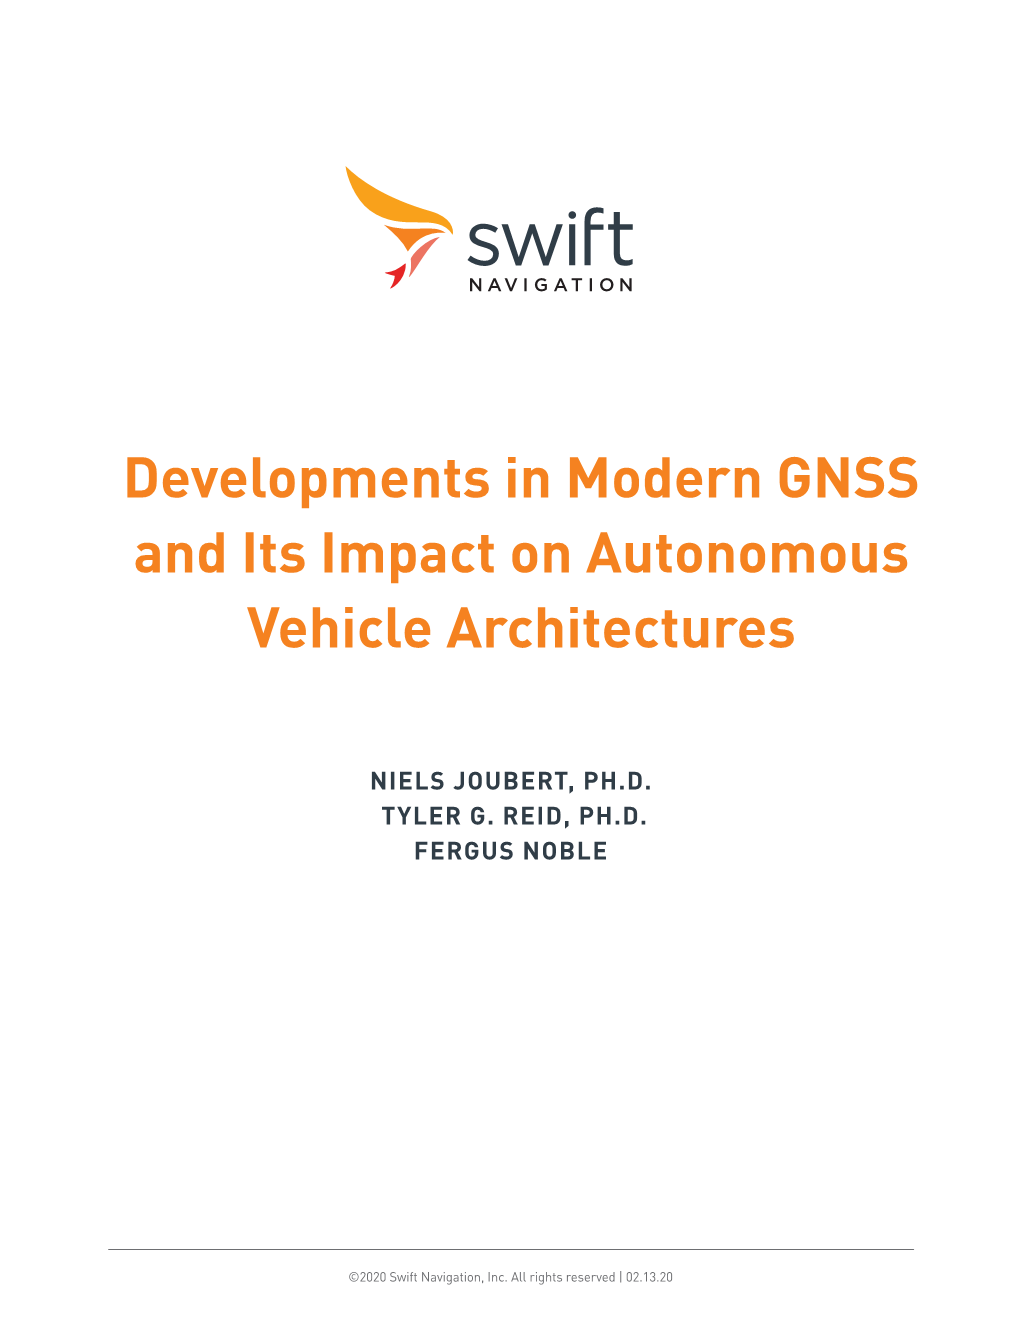 Developments in Modern GNSS and Its Impact on Autonomous Vehicle Architectures